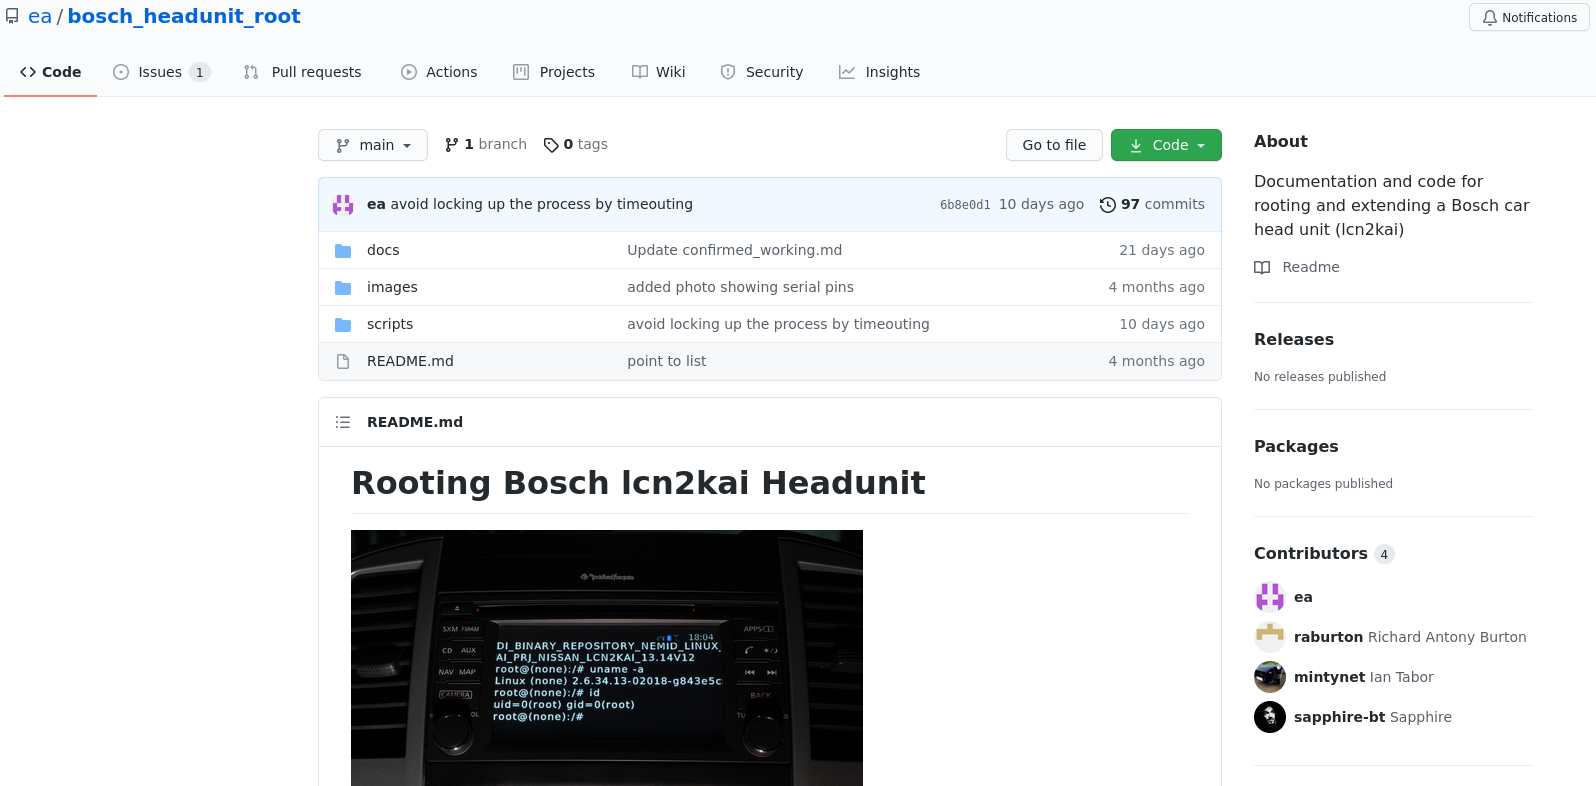 Github page for the Nissan Hack